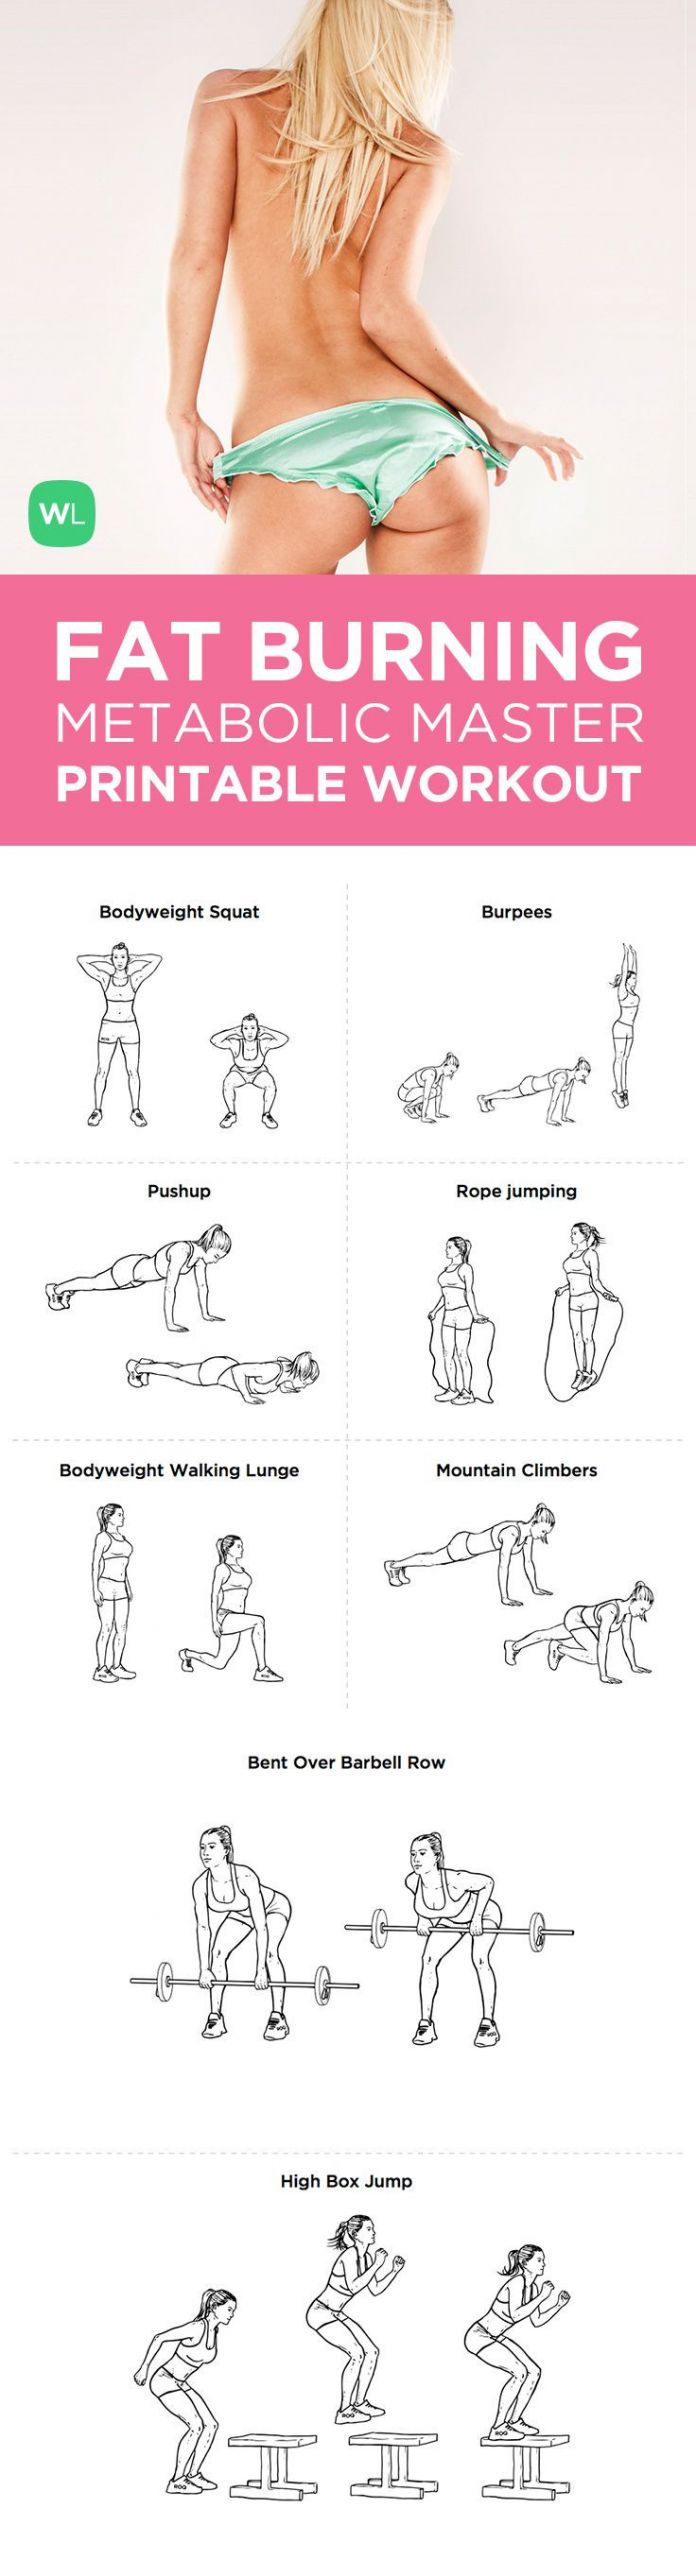 Best Fat Burning Workout
 17 Best images about Fat Burning Workouts on Pinterest